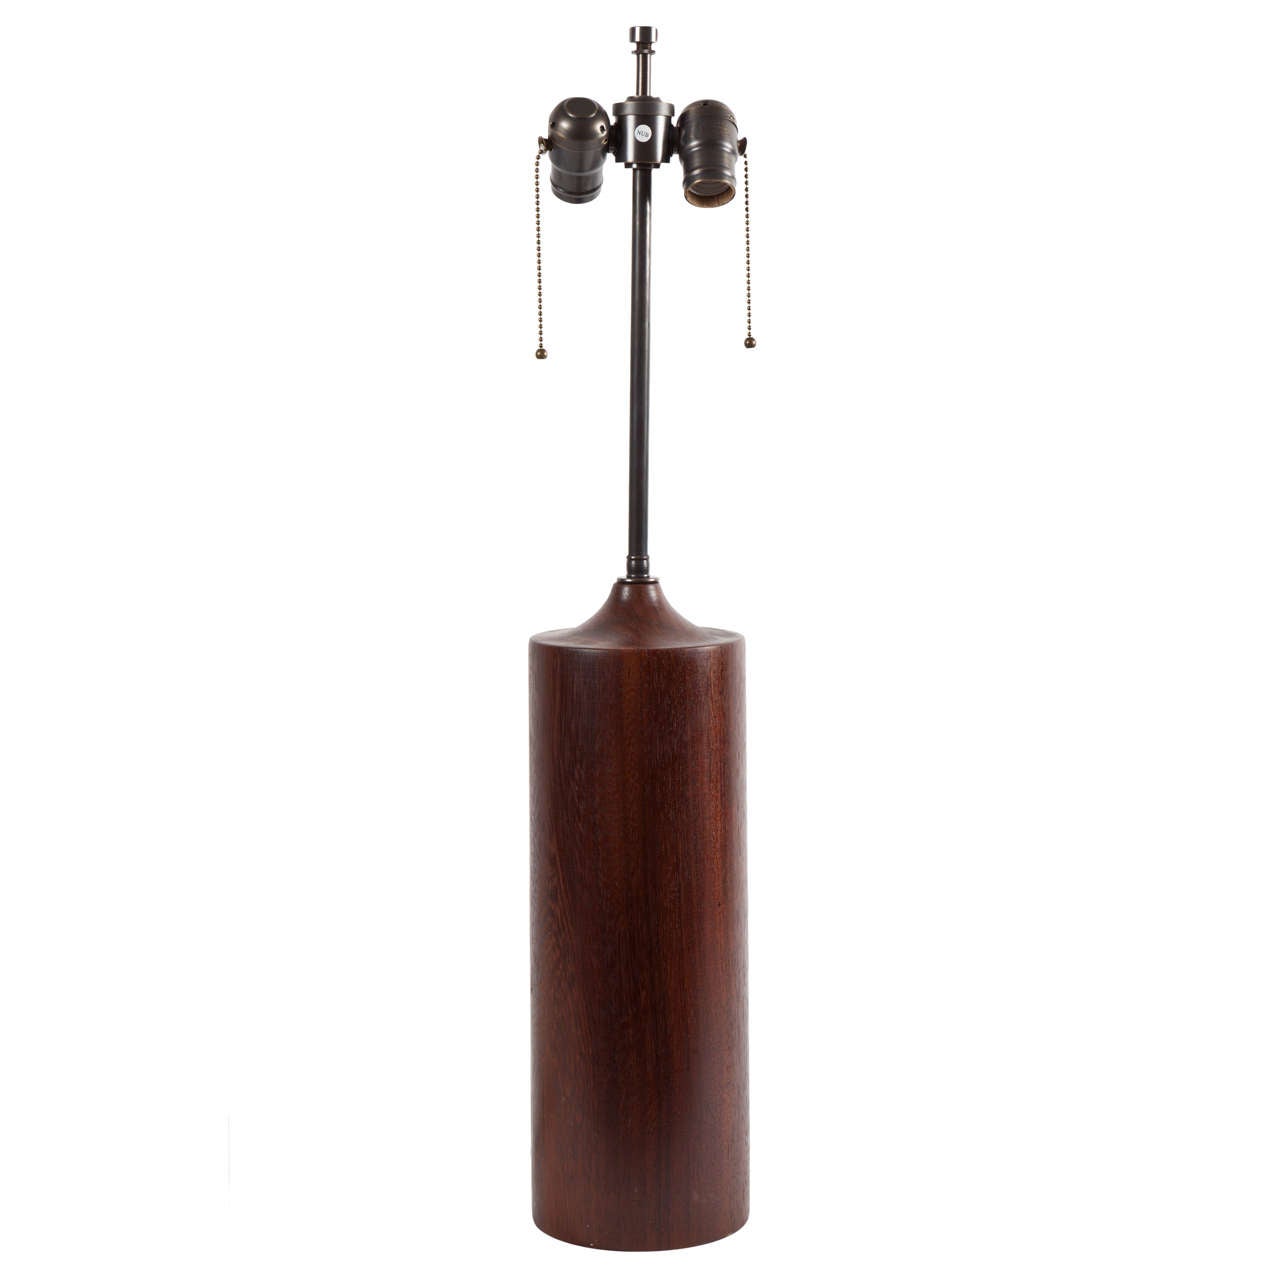 Pair of walnut wood table lamps. USA, circa 1960. Modern cylindrical form with tapered neck and patinated brass (bronzed) hardware.

Dimensions:
29.75 inch overall height (to finial)
5.25 inch base diameter